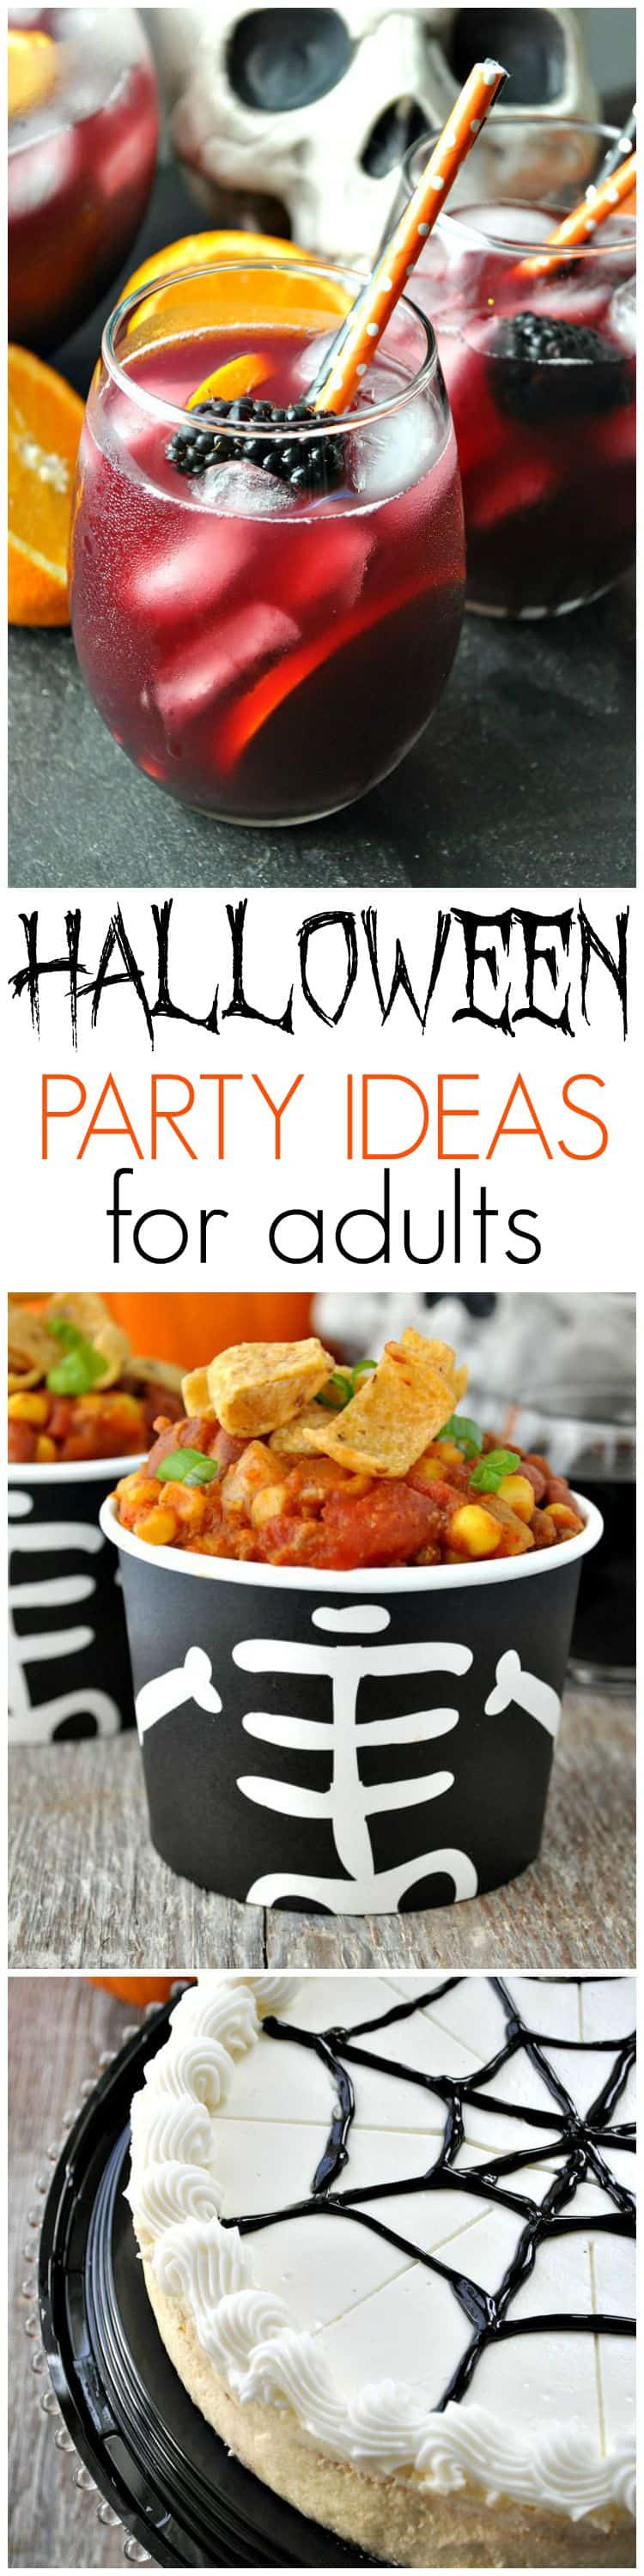 Halloween Party Decorations Ideas For Adults
 Slow Cooker Pumpkin Chili Halloween Party Ideas for